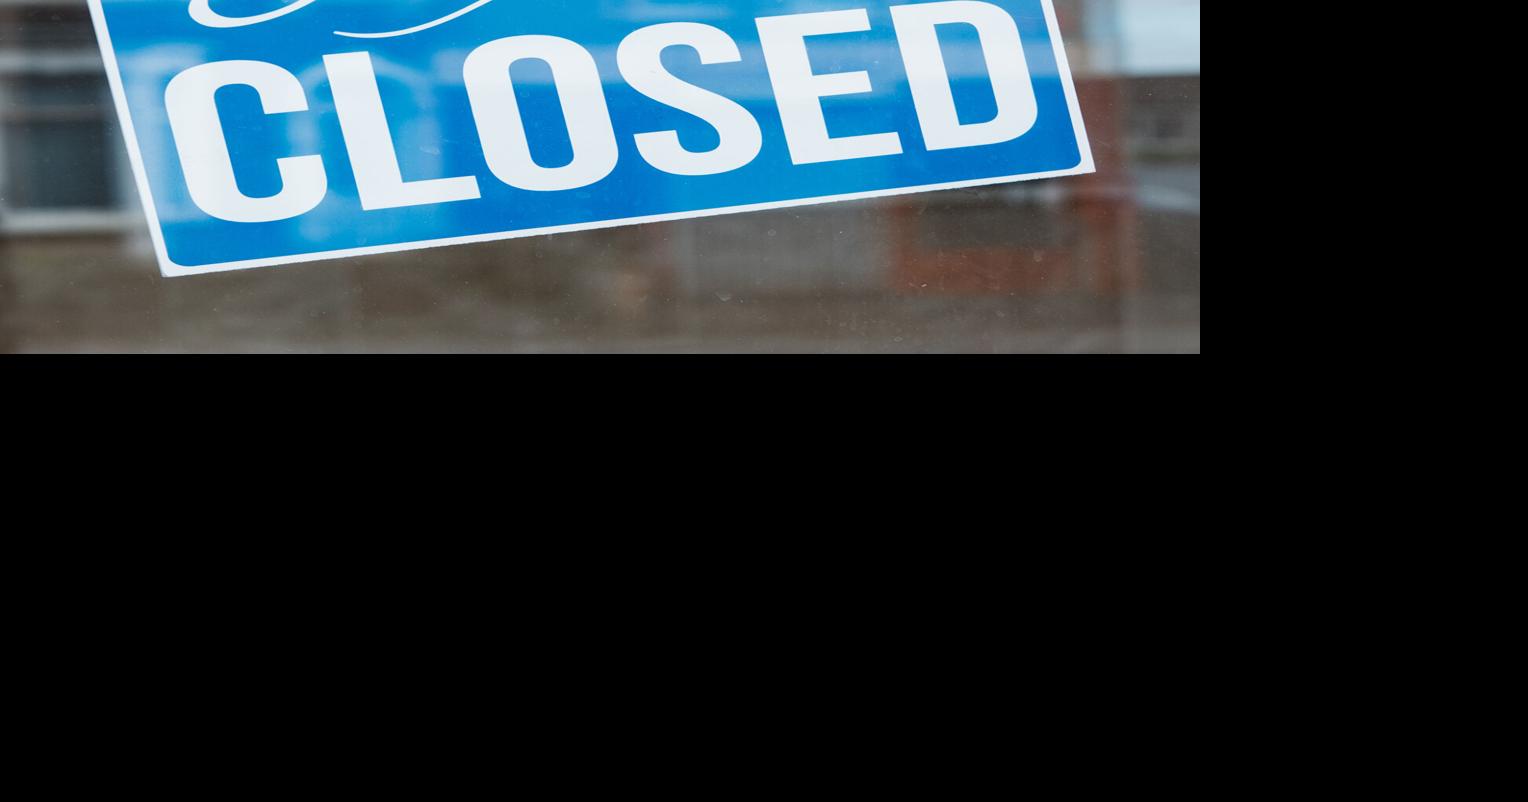 More restaurants closing permanently reveals significant headwinds